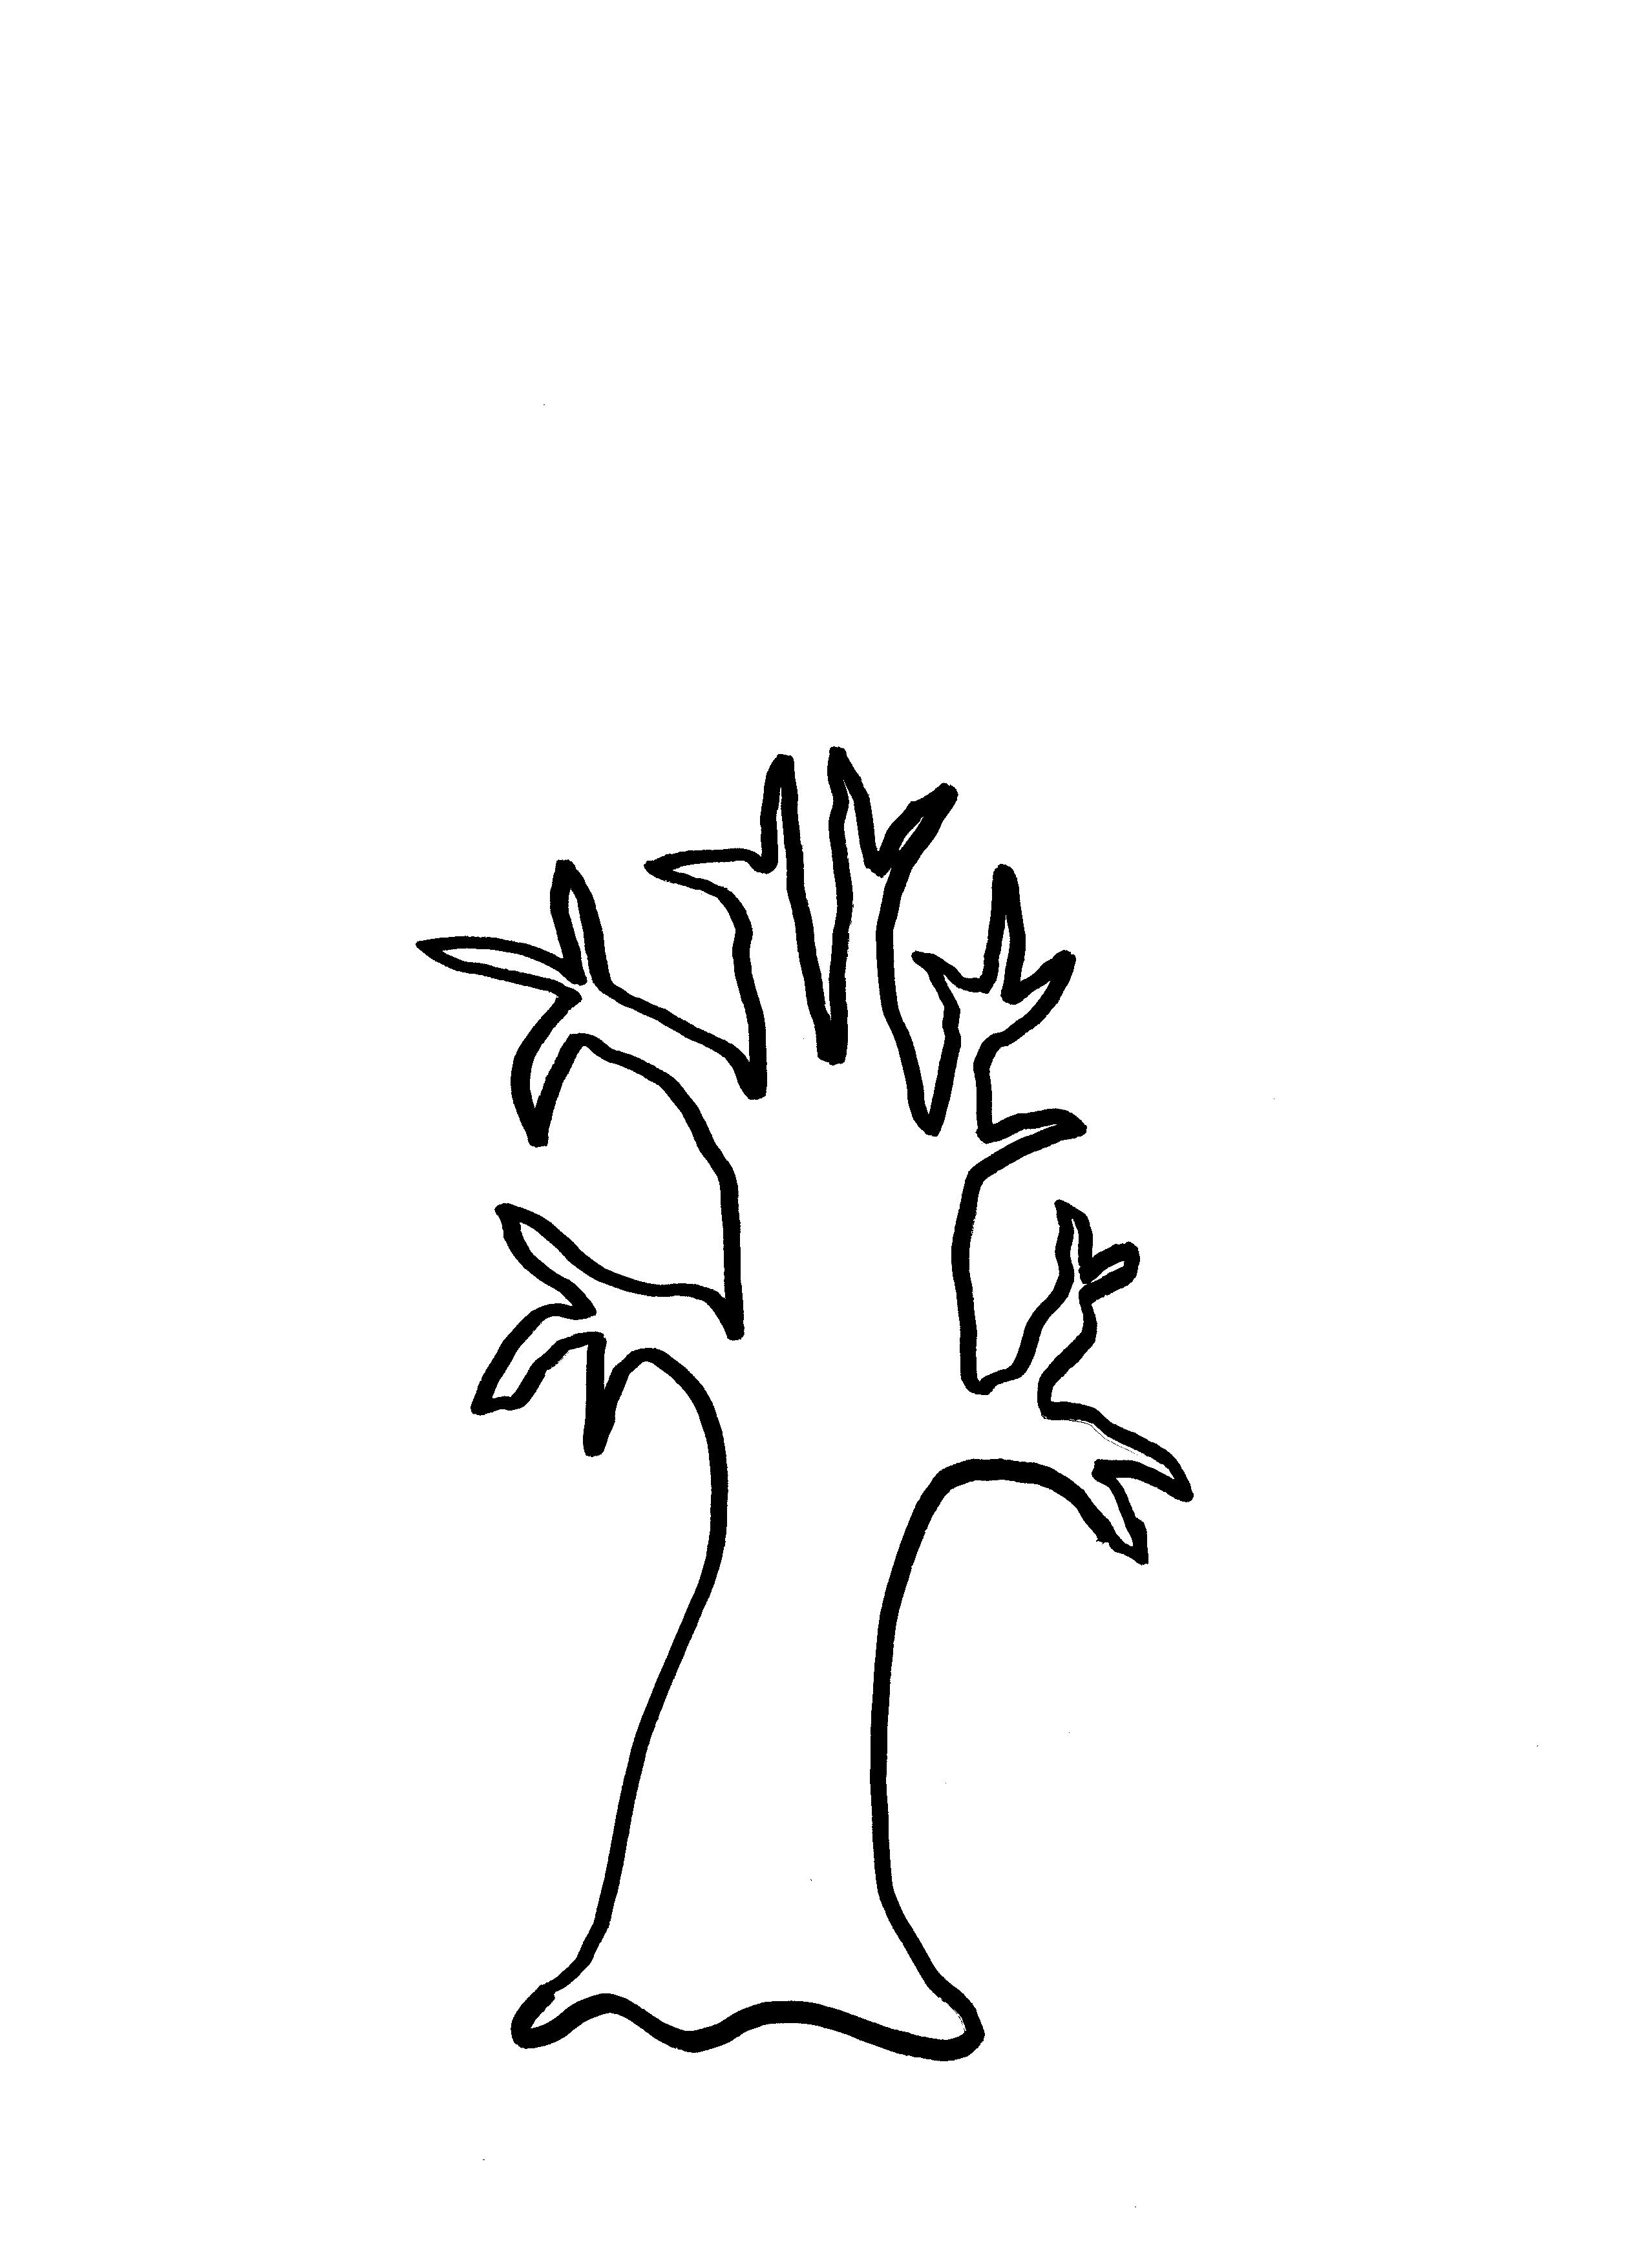 657 Tree Trunk free clipart.